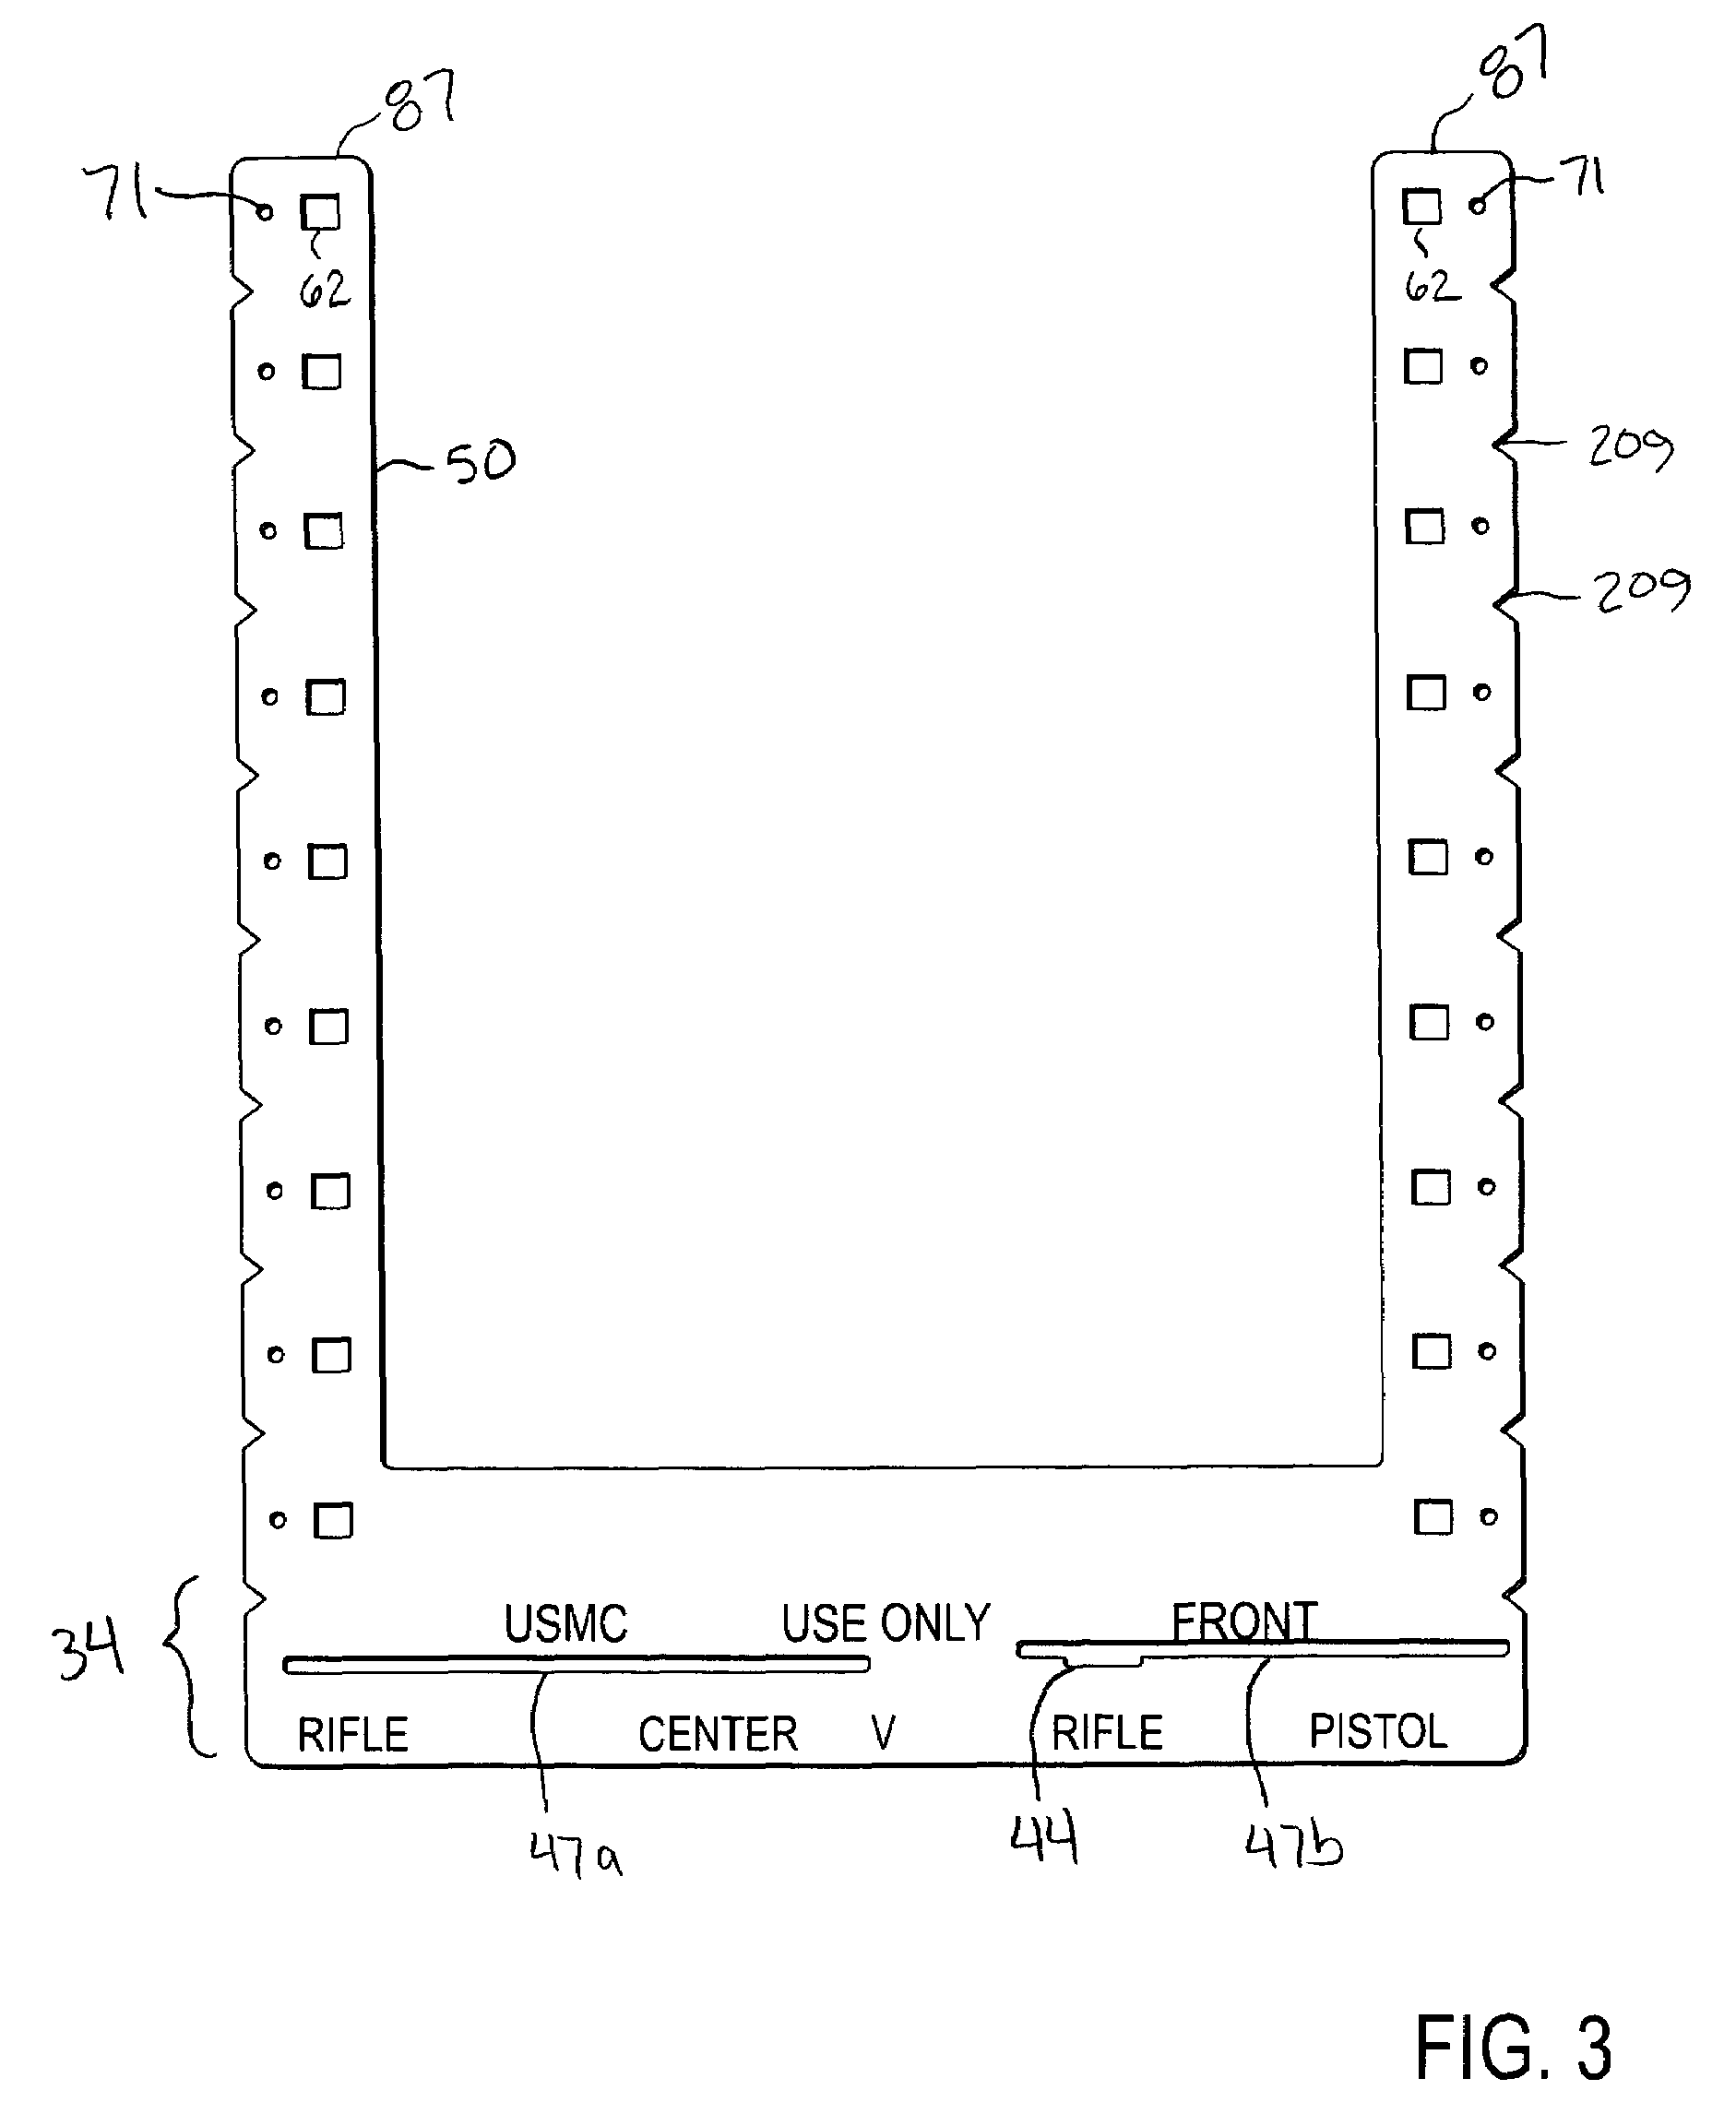 Apparatus for positioning and mounting awards